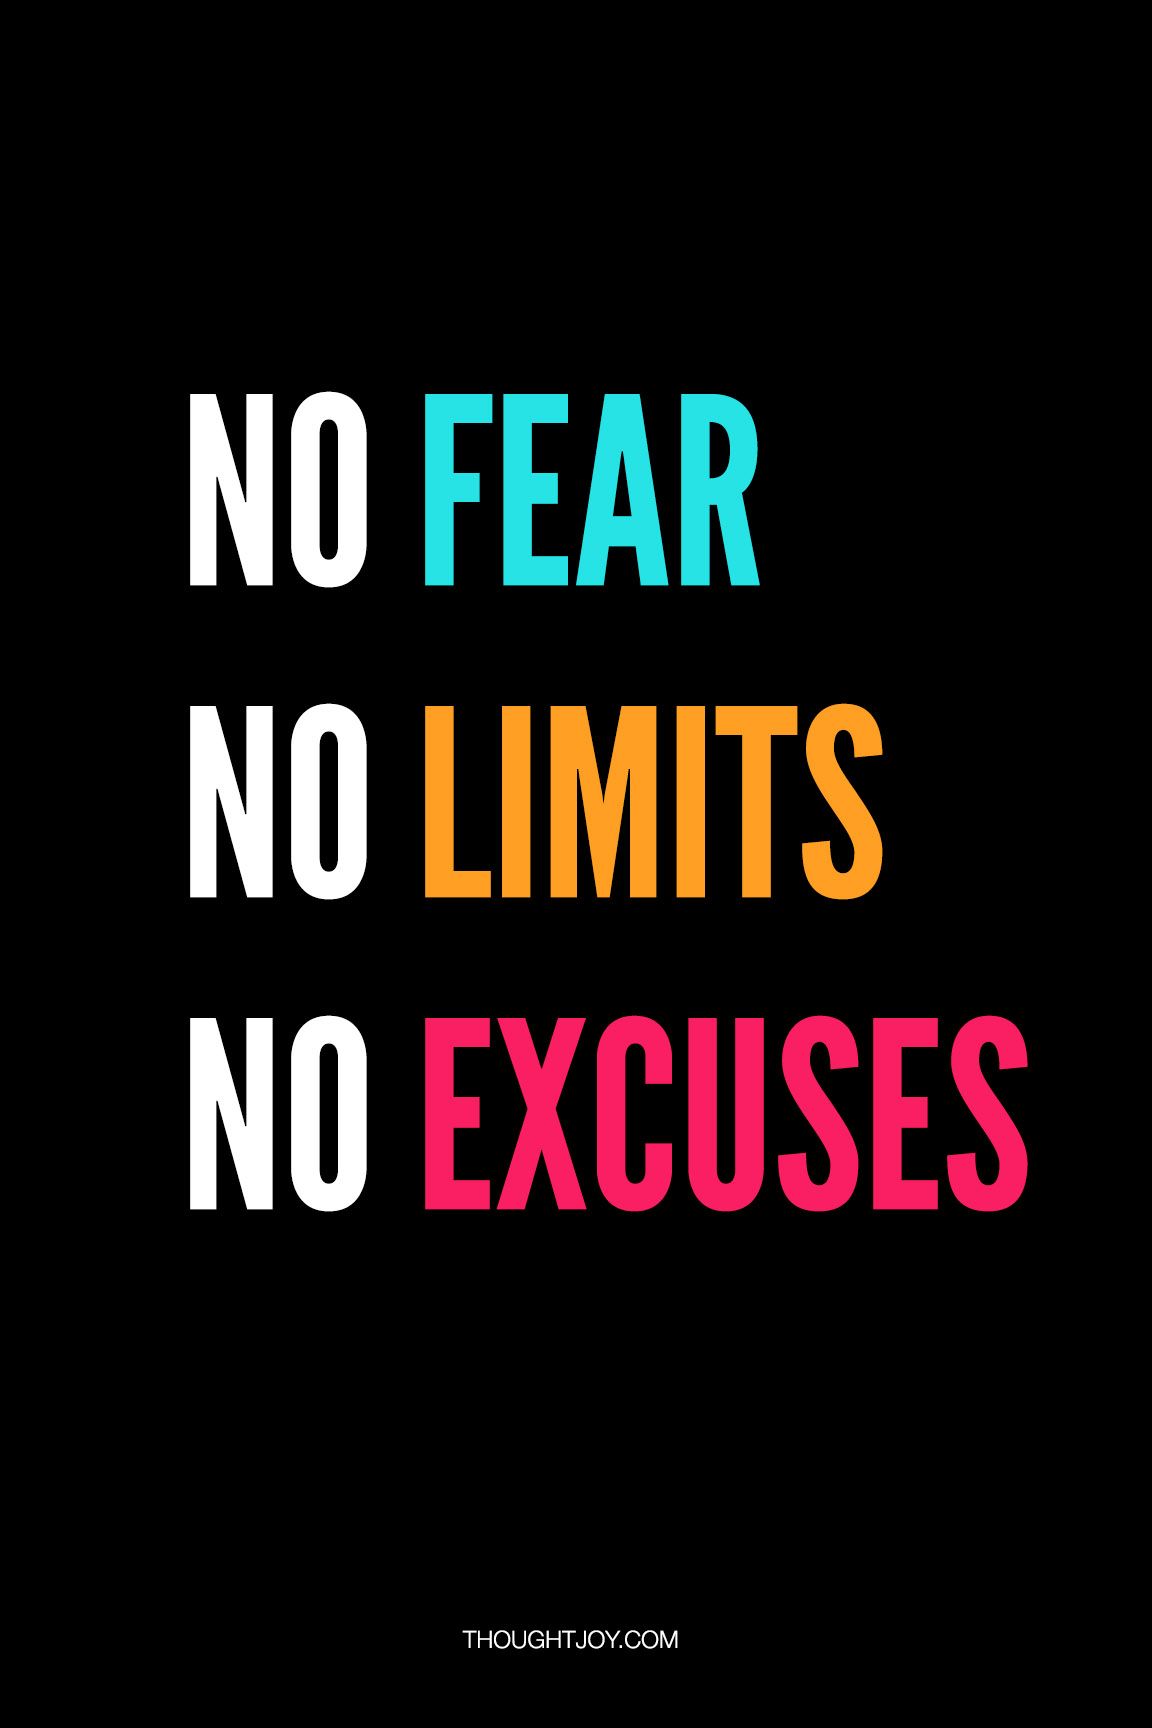 No Excuses Wallpapers - Wallpaper Cave